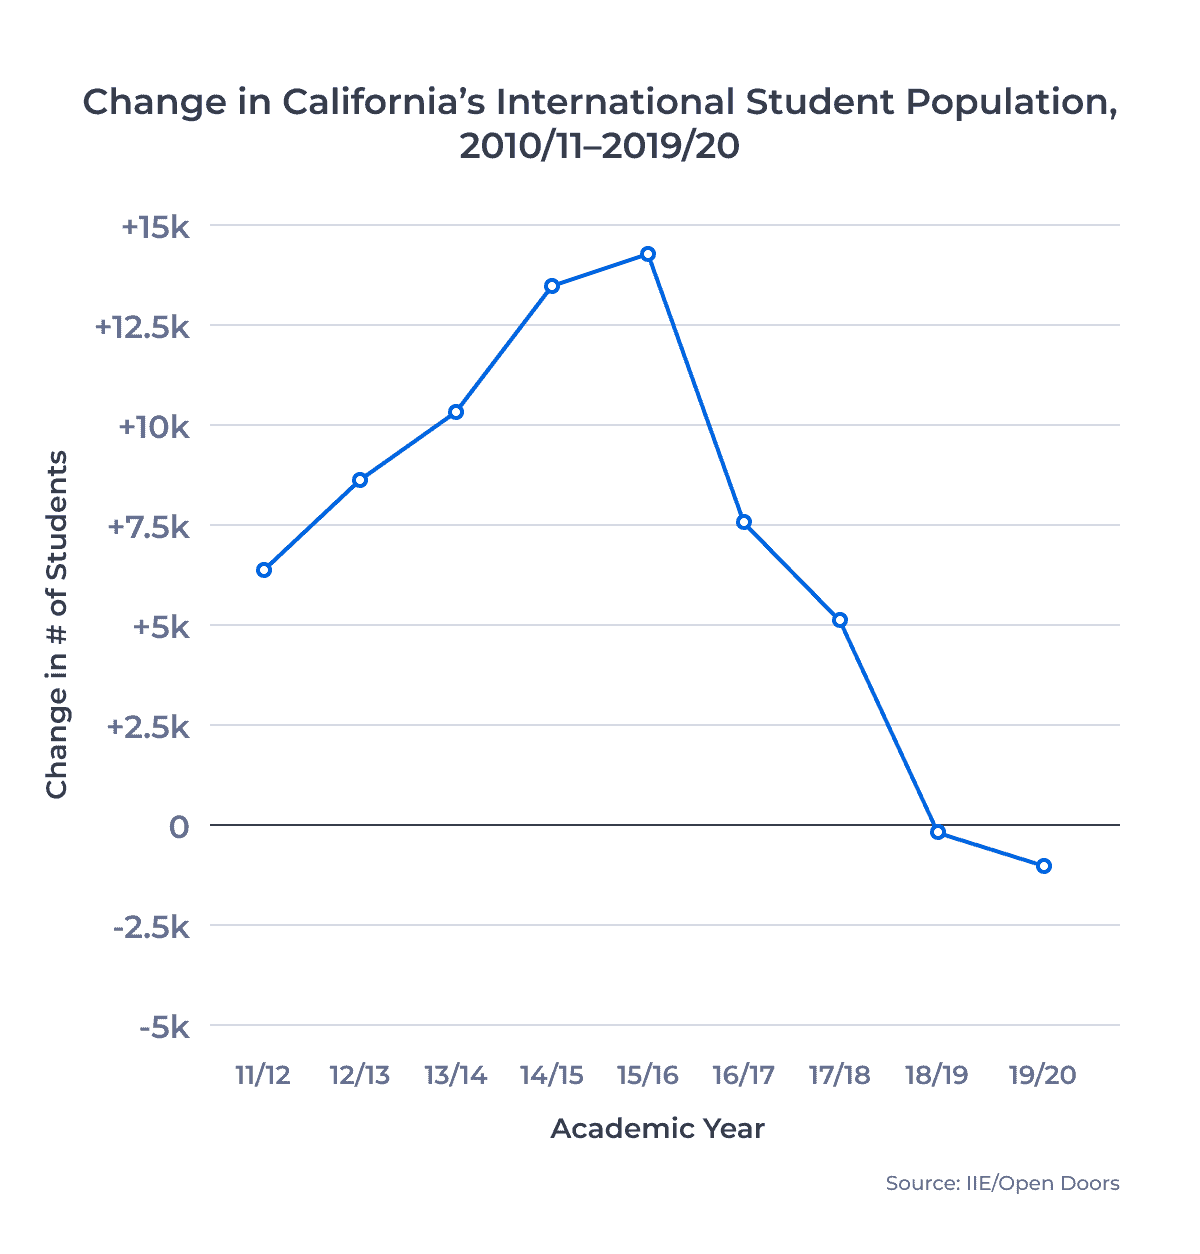 Line chart showing the change in California's international student population from the 2010/11 to 2019/20 academic year. Examined in detail below.